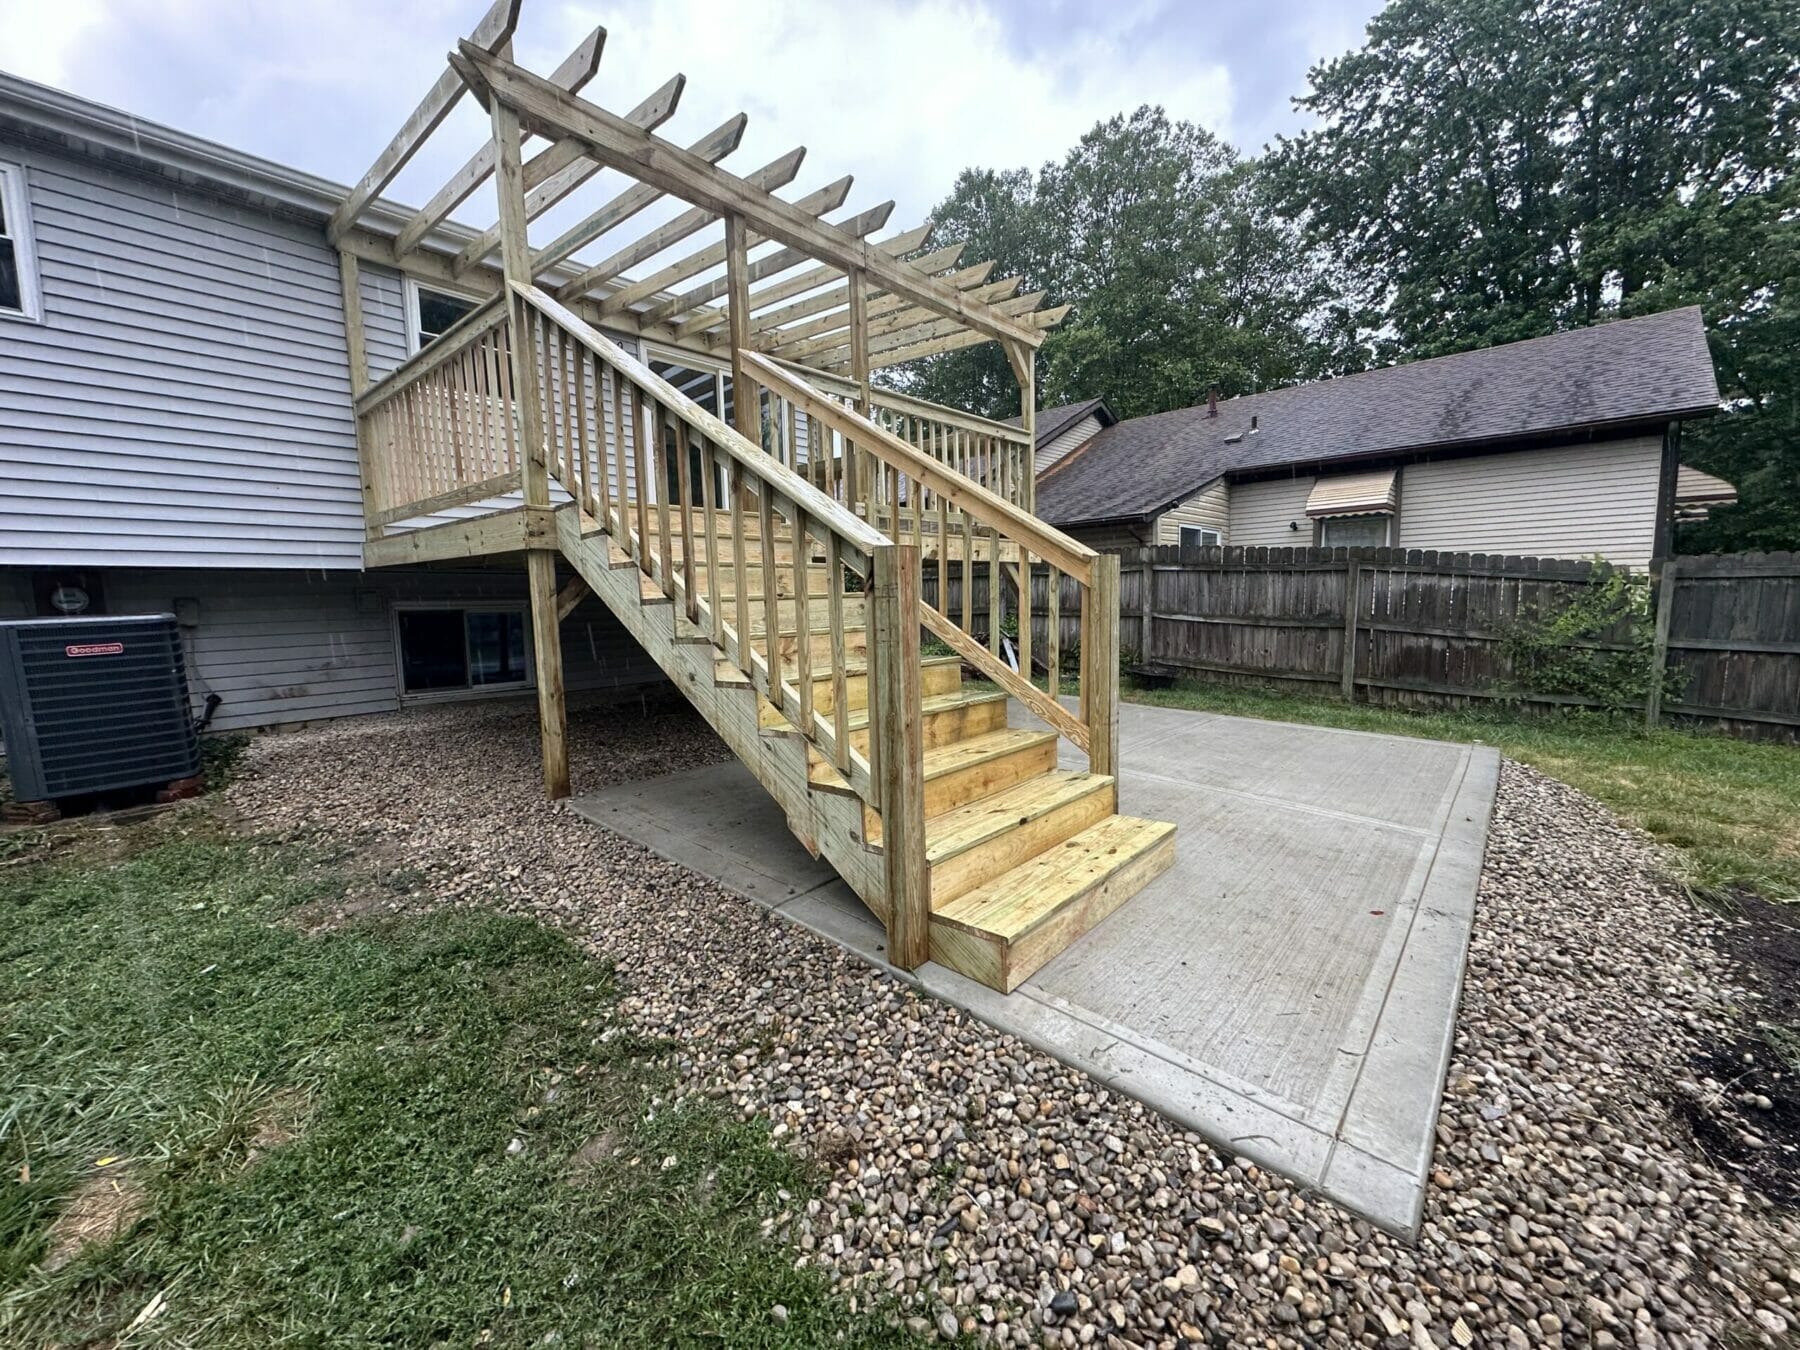 New deck with staircase